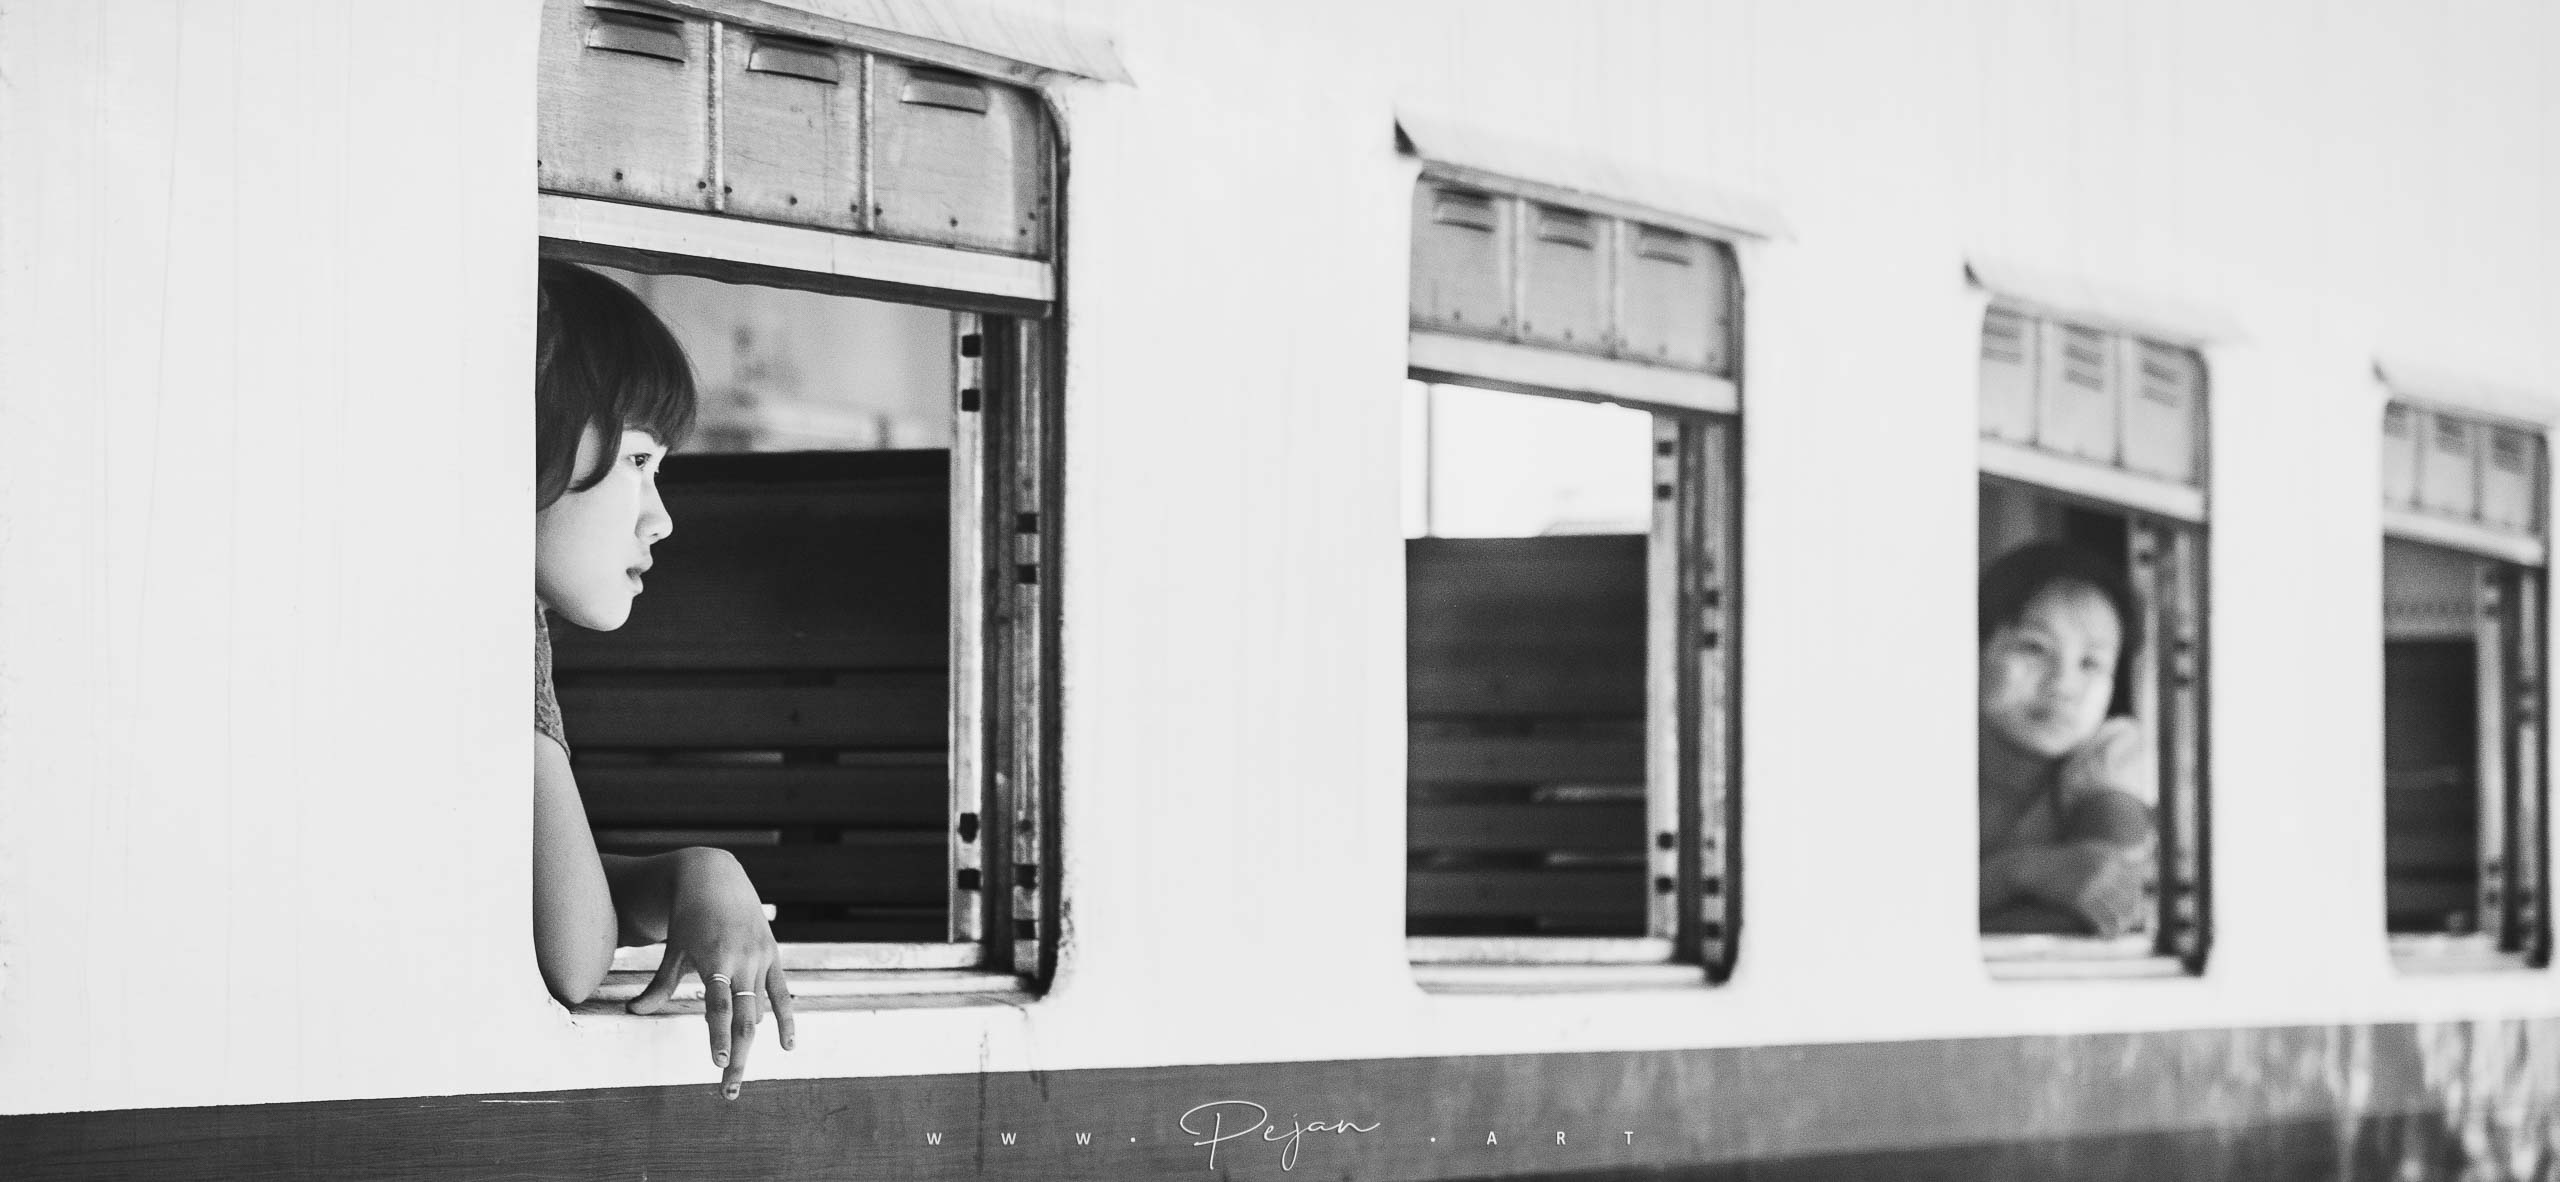 A young woman looking away at the window of a train in the South of Burma, Street photography, Monochrome photography, Black and White,